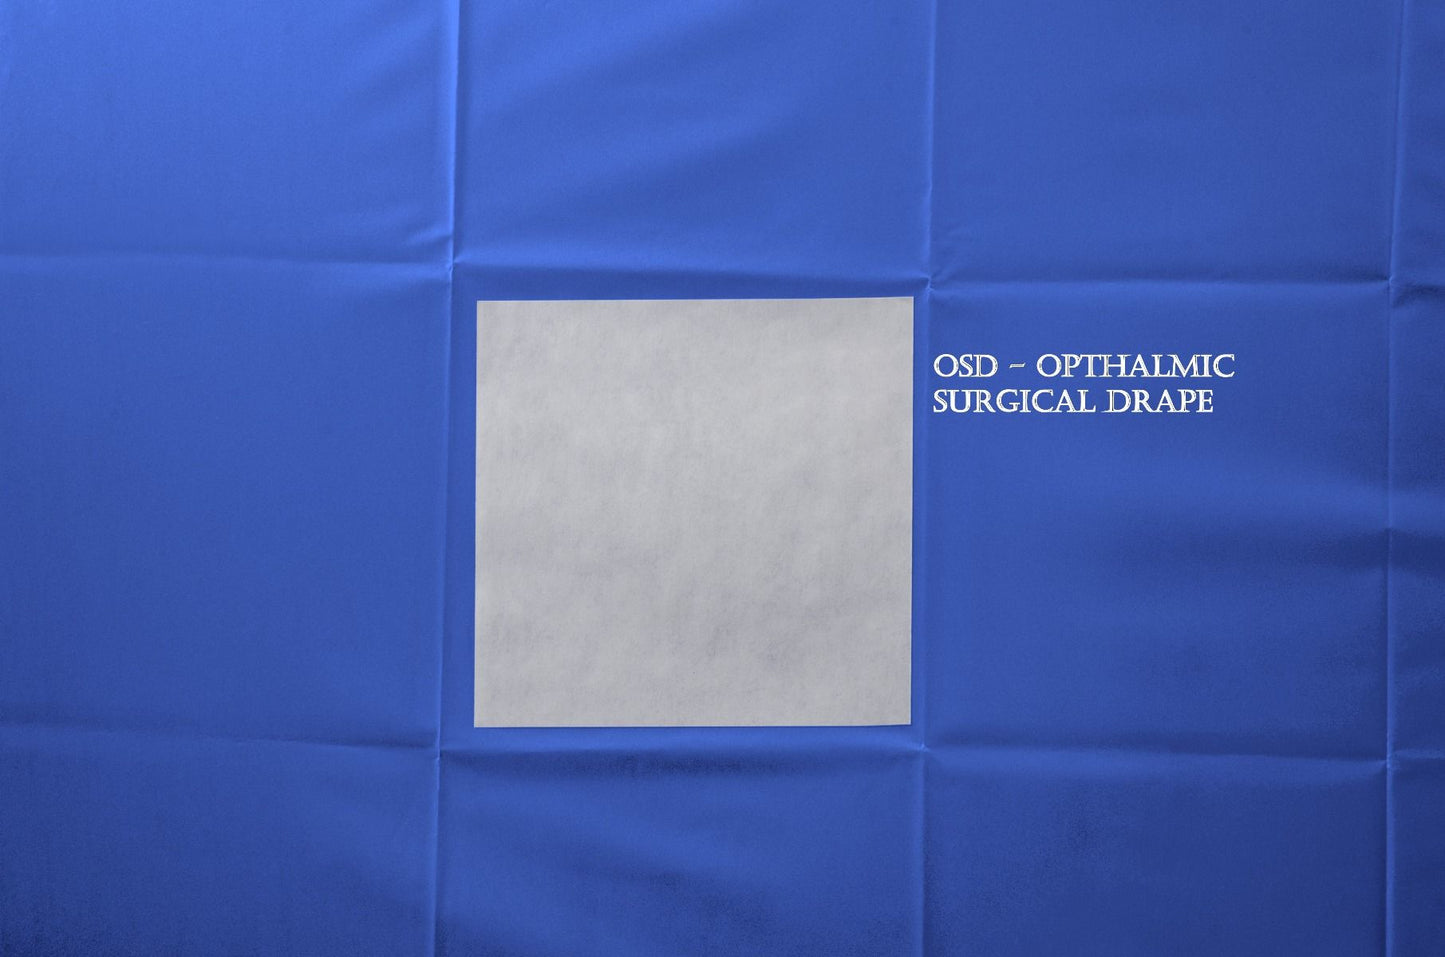 OPHTHALMIC SURGICAL DRAPE